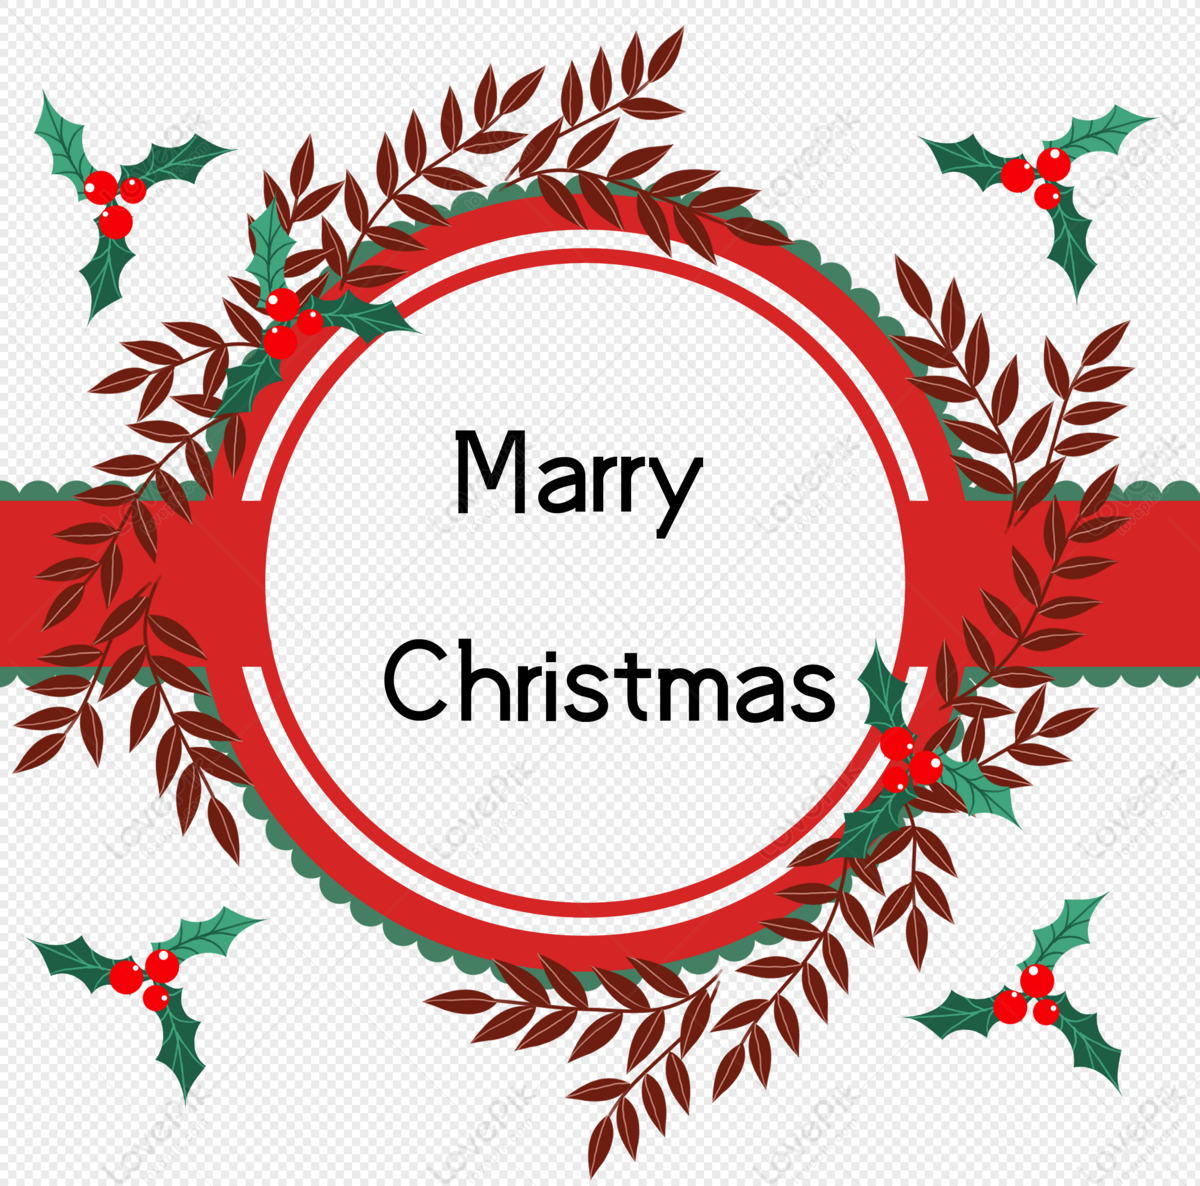 christmas-border-decoration-png-image-and-clipart-image-for-free